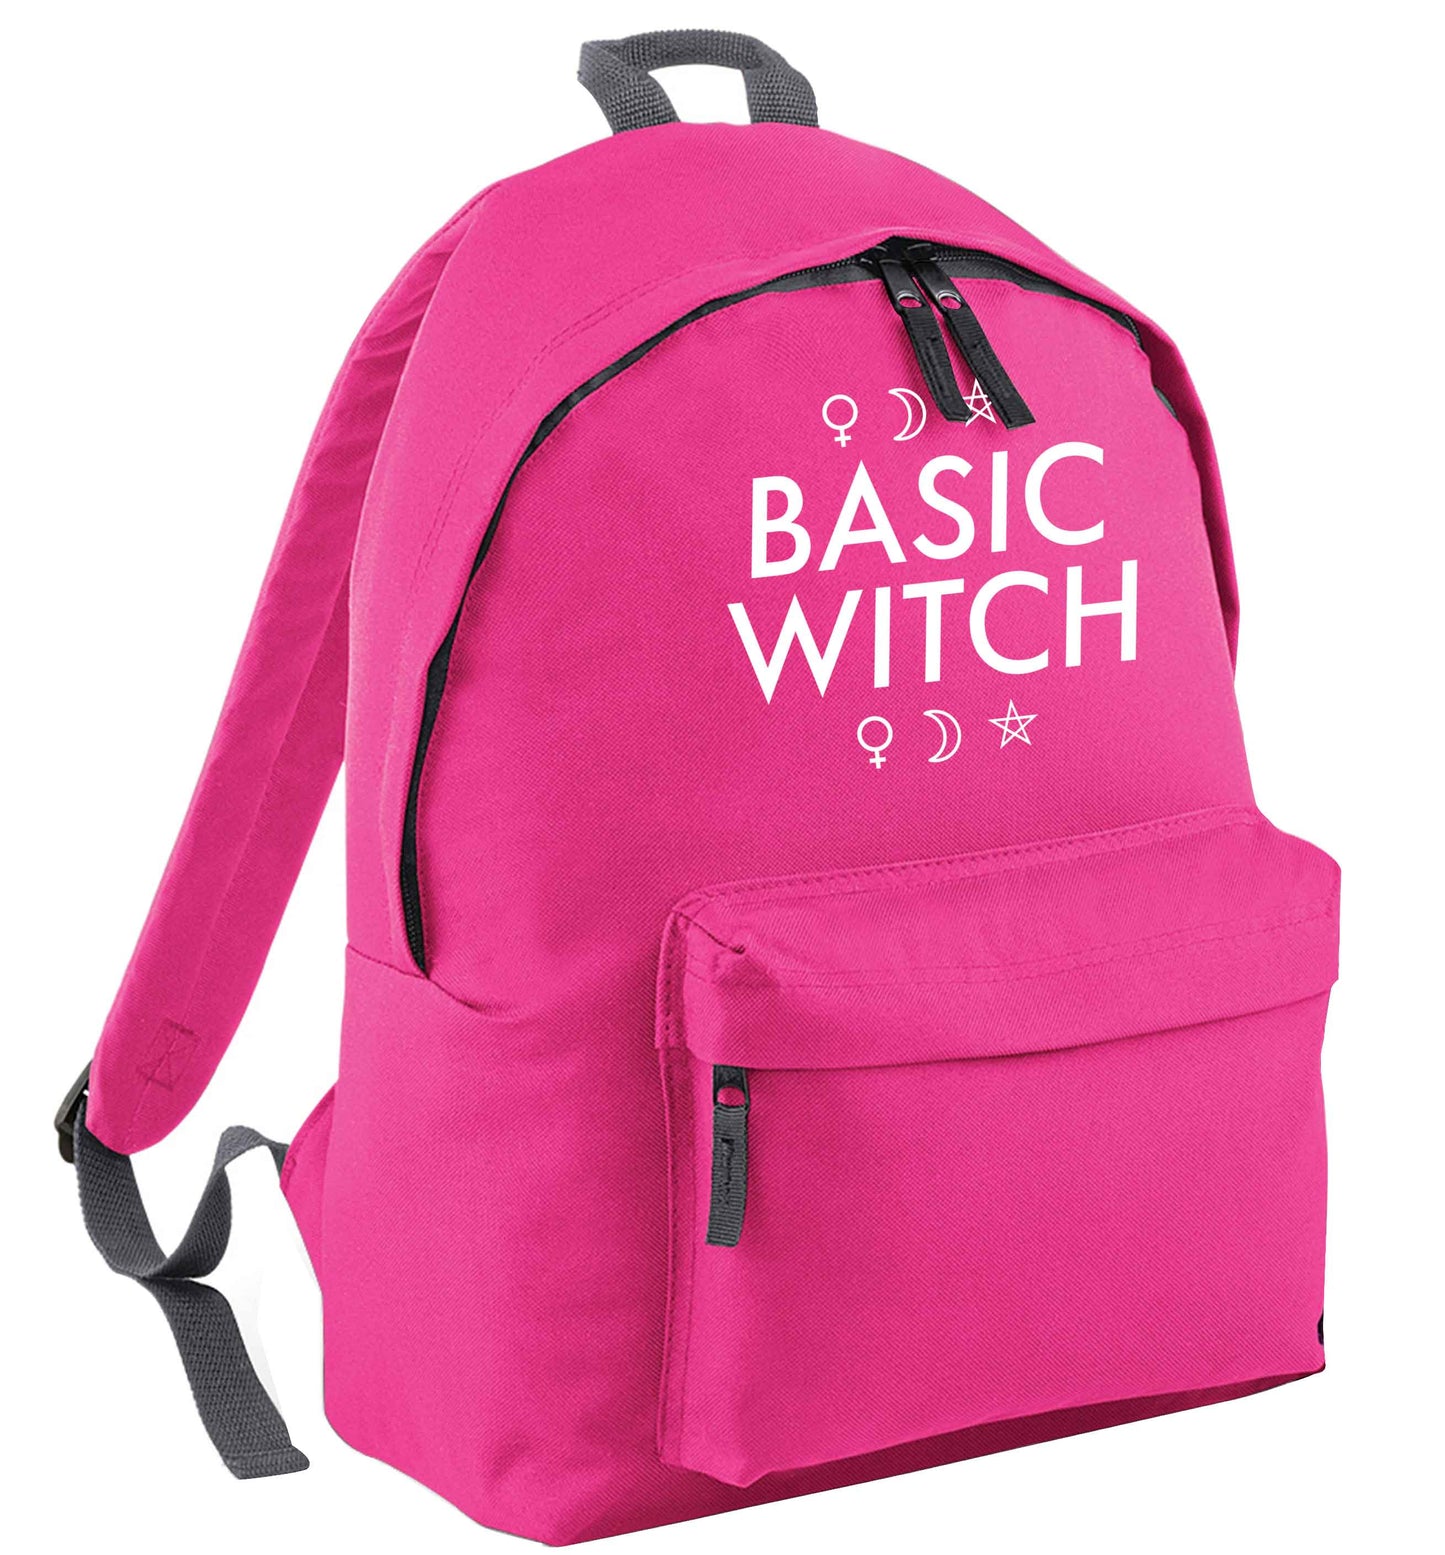 Basic witch 1 | Children's backpack